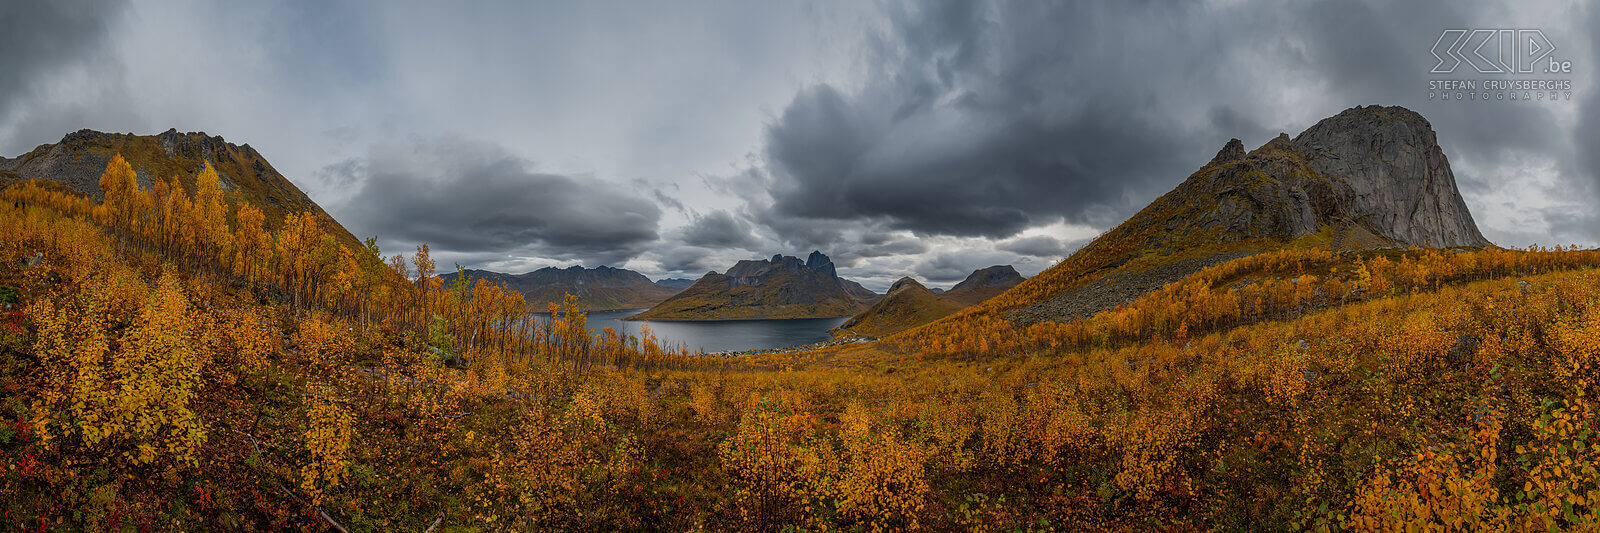 Norway - Senja - Fjordgard - Hesten trail Panorama image with beautiful autumn colors from the start of the ascent of the Hesten, a mountain that offers a fantastic view of the surrounding fjords and the famous rock peak of the Segla. The trail starts from the village of Fjordgard Stefan Cruysberghs